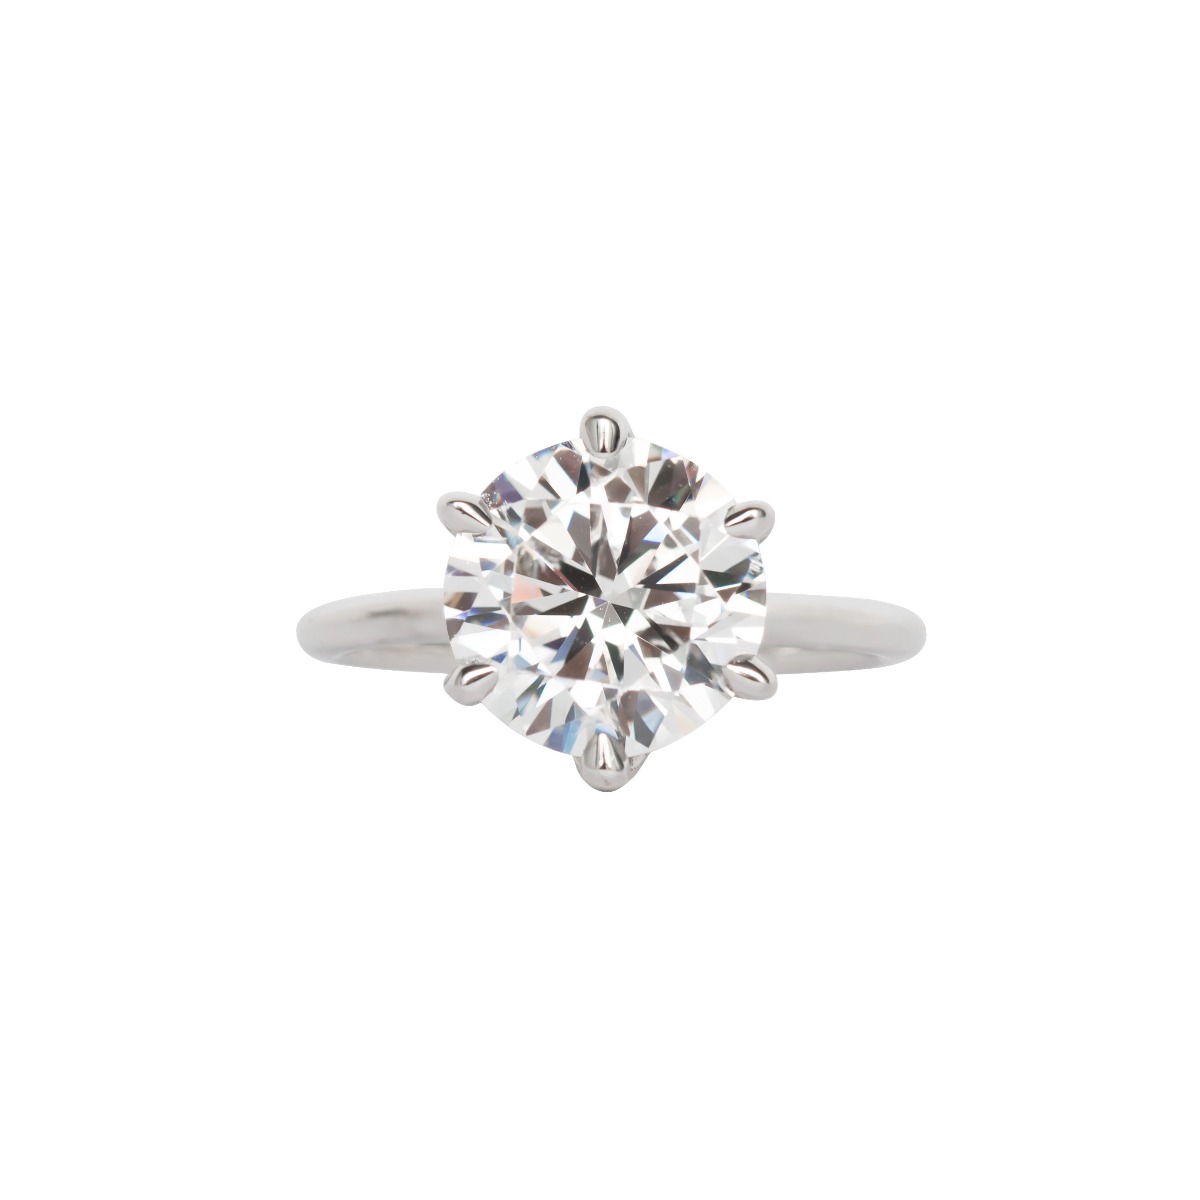 6 Prong Tulip Solitaire Setting With Diamond Bridge In White Gold